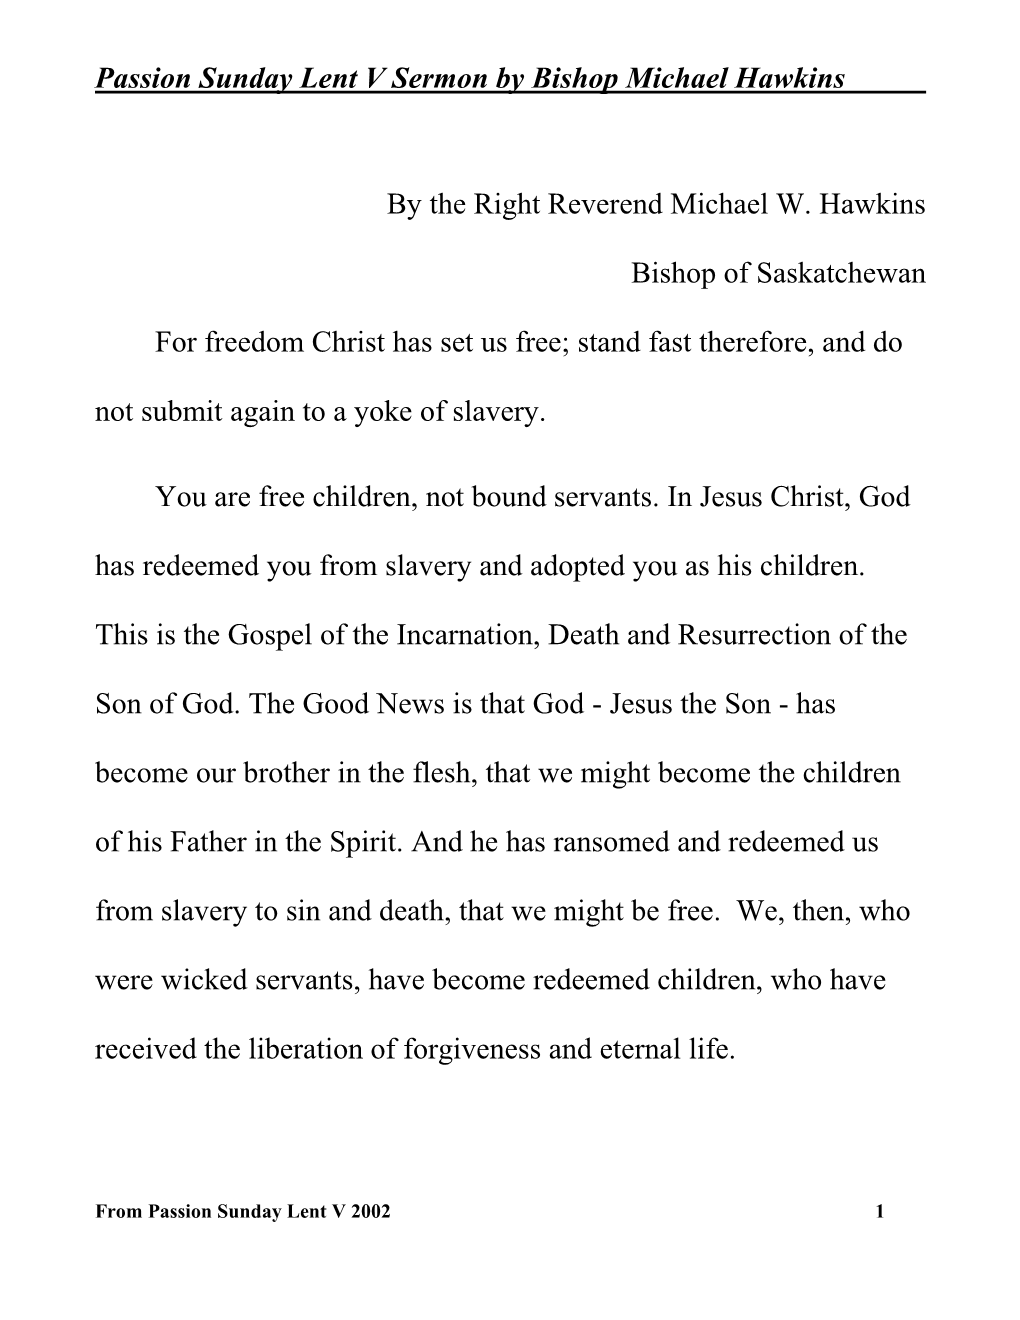 Passion Sunday Lent V Sermon by Bishop Michael Hawkins by the Right Reverend Michael W. Hawkins Bishop of Saskatchewan for F